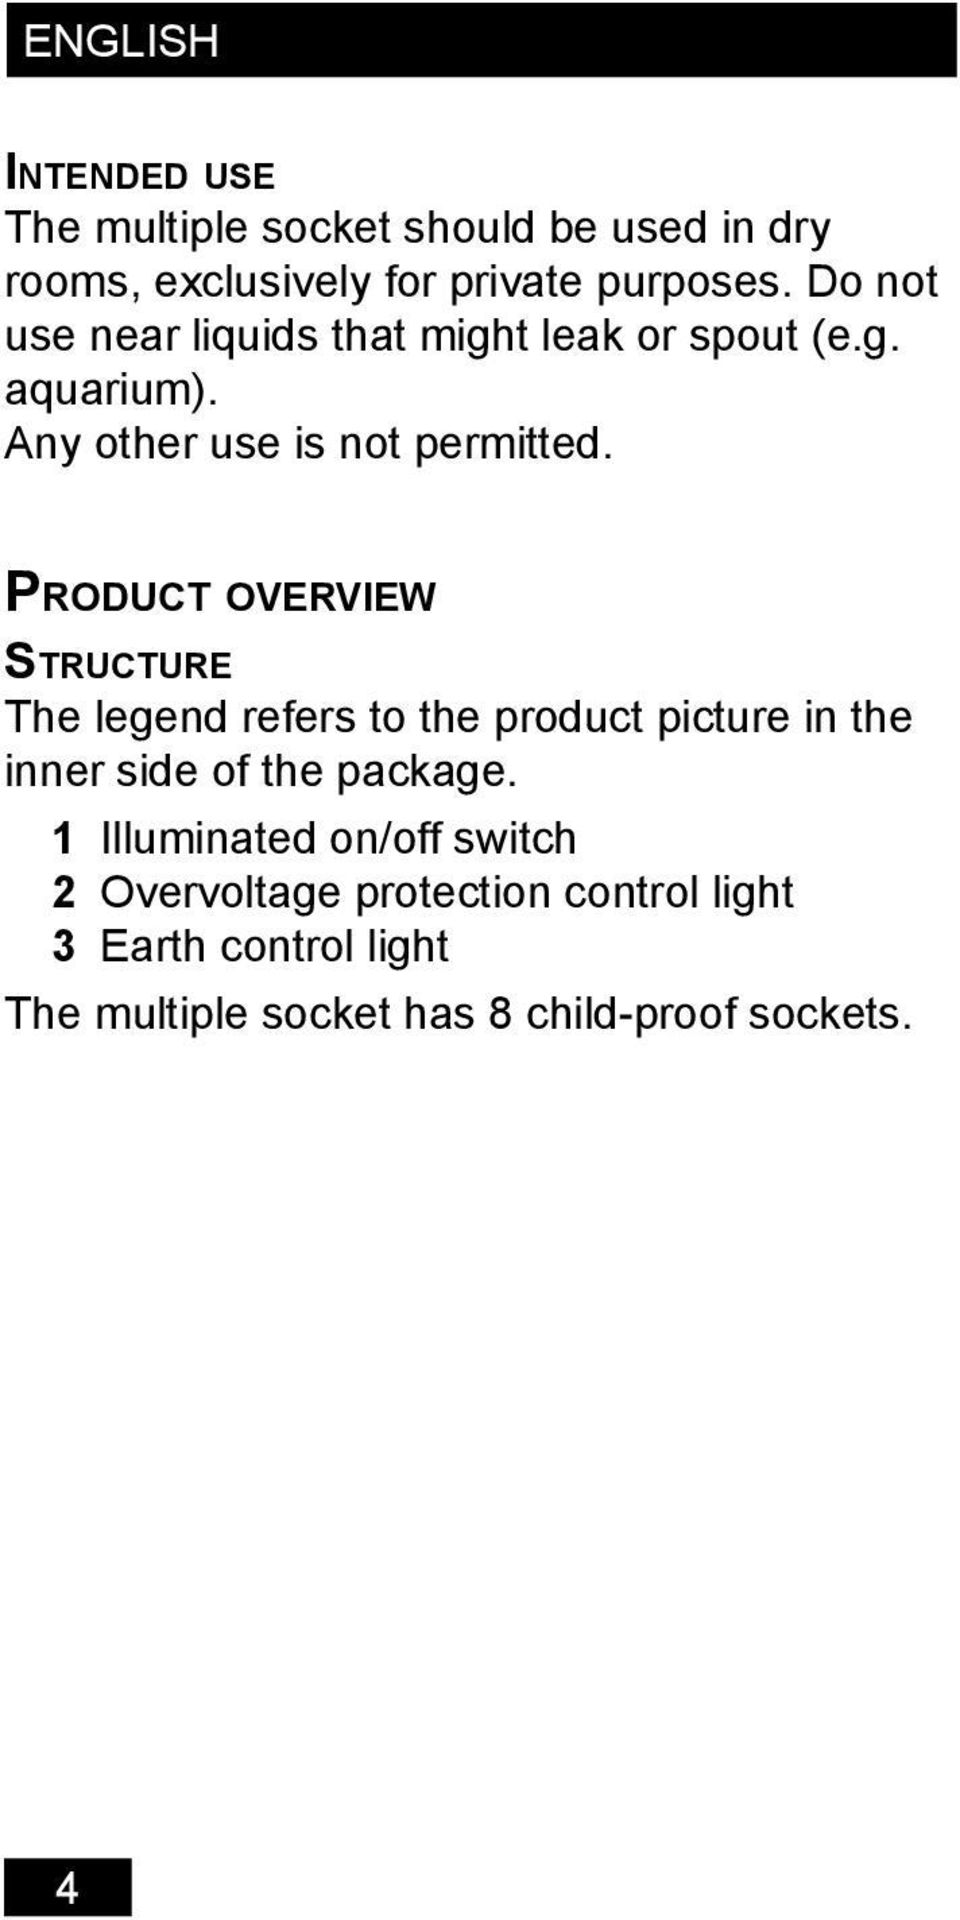 PRODUCT OVERVIEW STRUCTURE The legend refers to the product picture in the inner side of the package.